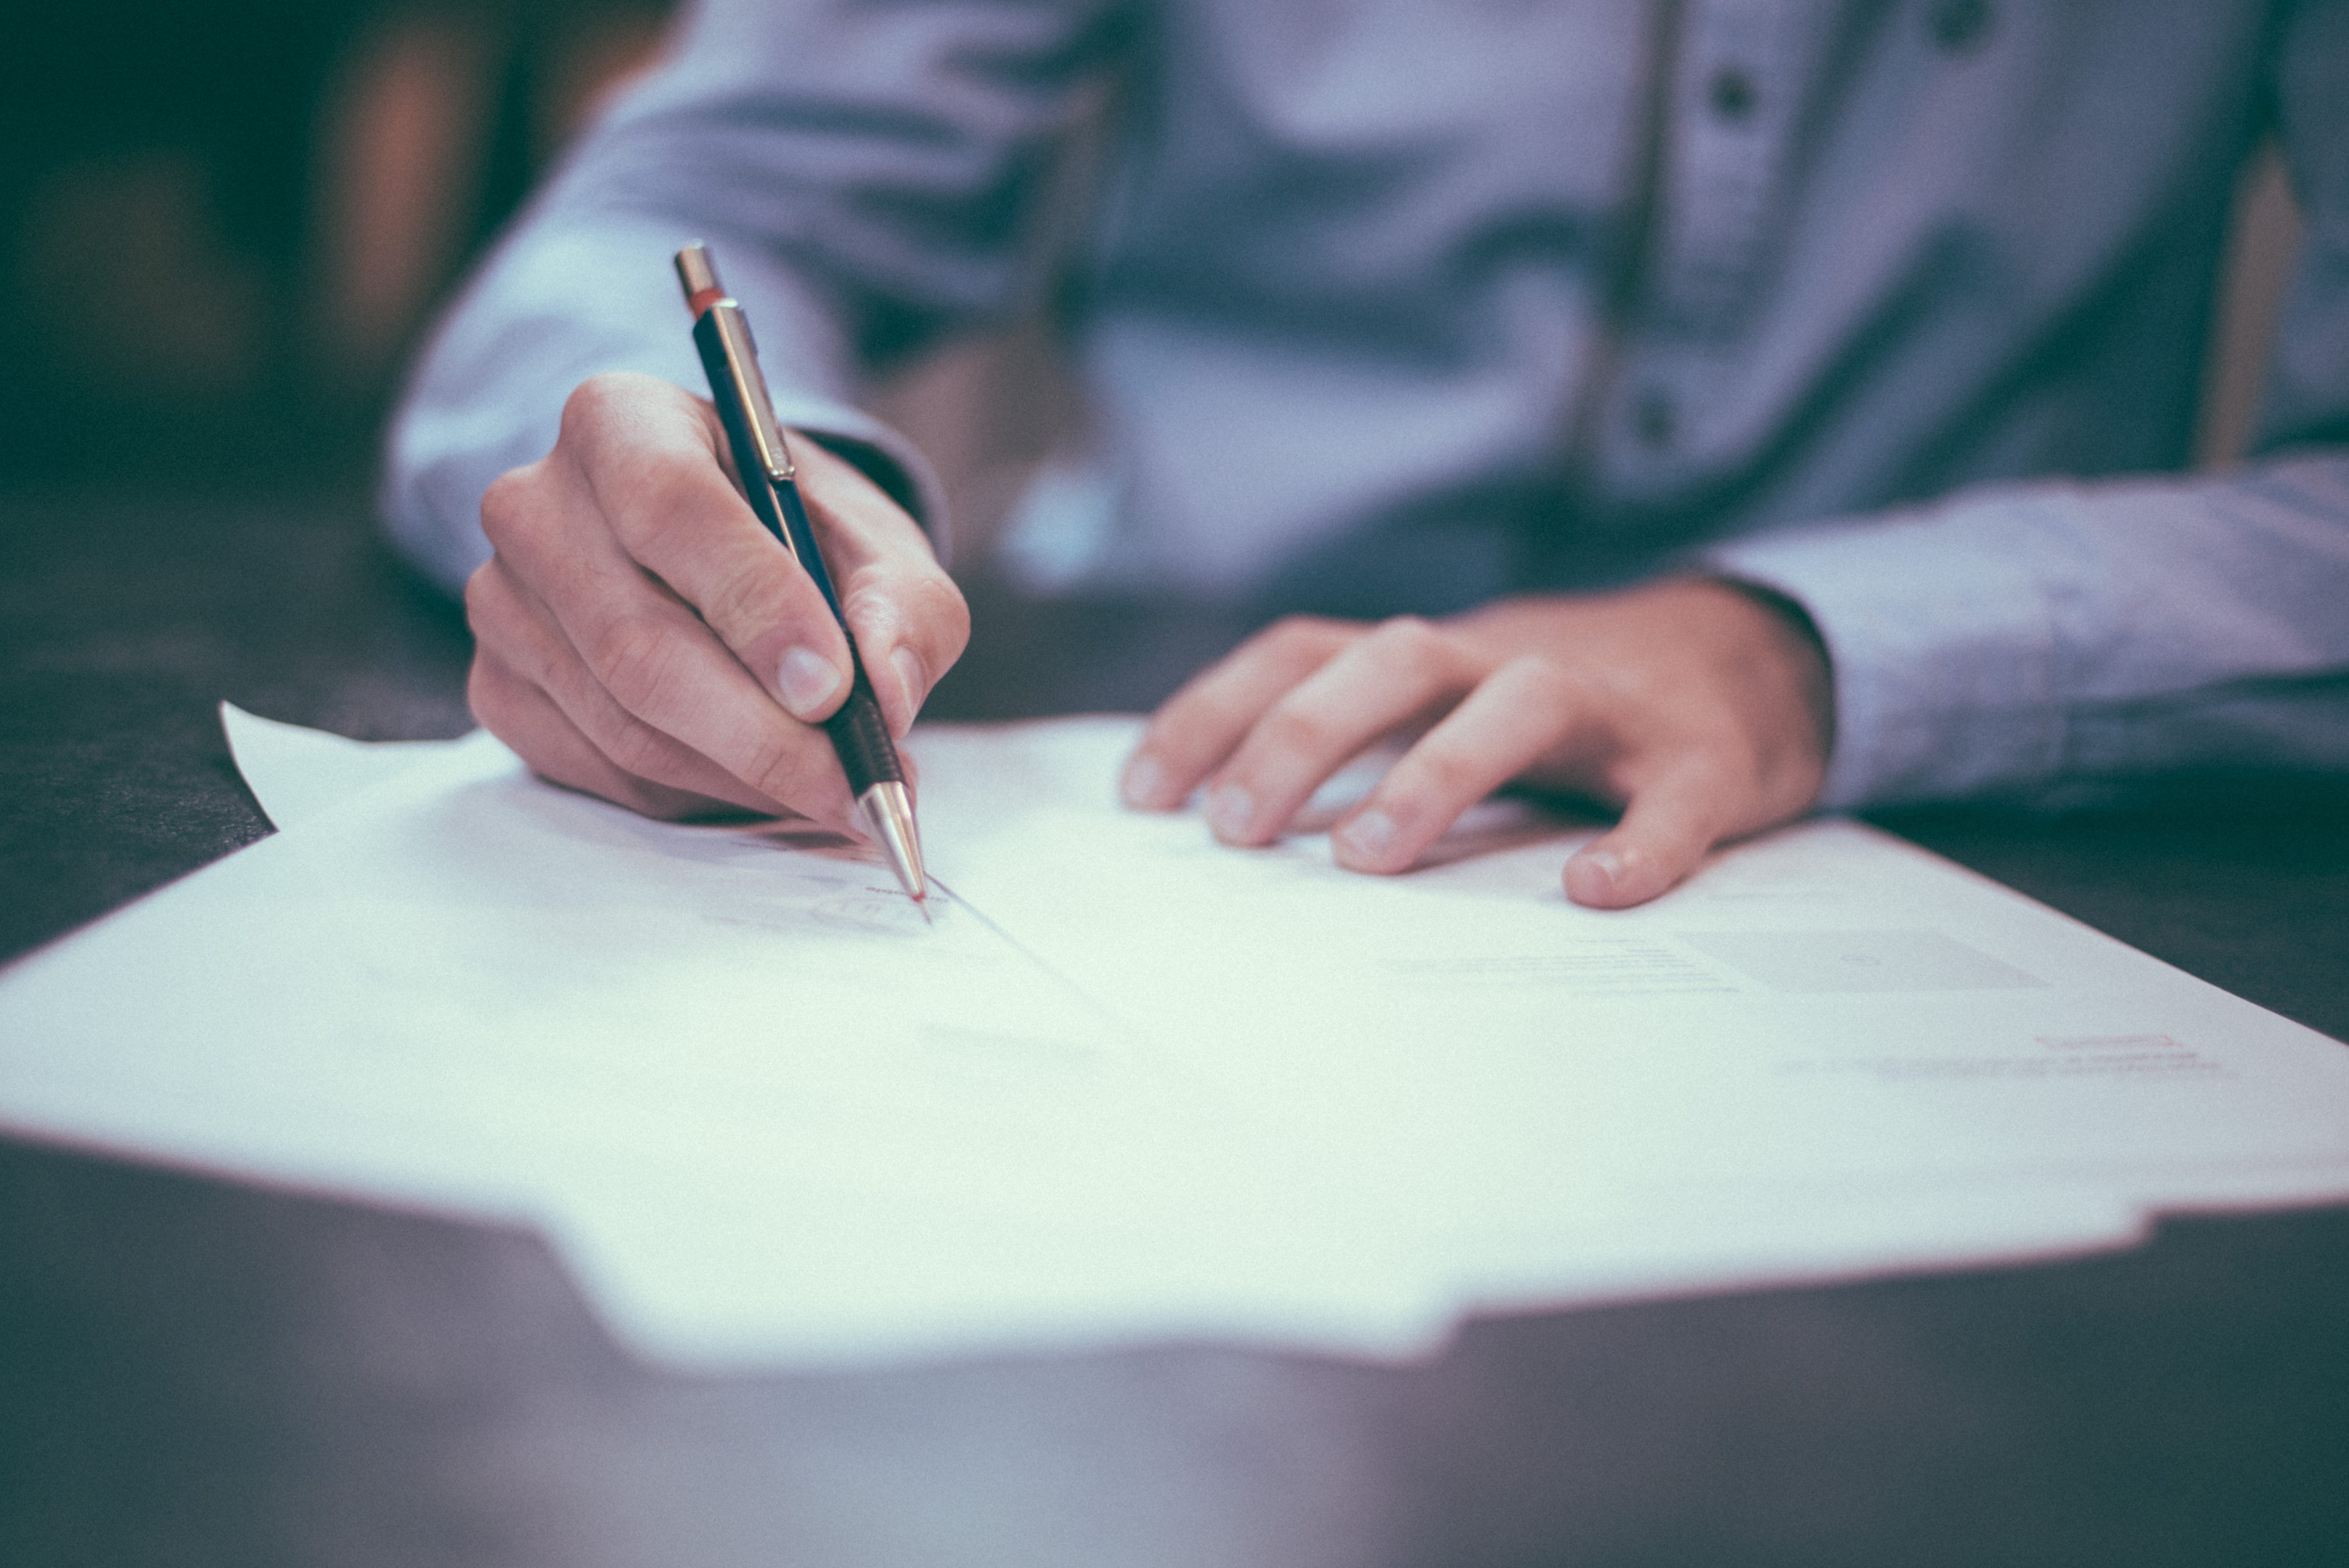 A focused image of masculine hands holding a pen and reviewing paper documents, like a career counselor reviewing a resume or cover letter. The person wears a light blue button down shirt with black buttons